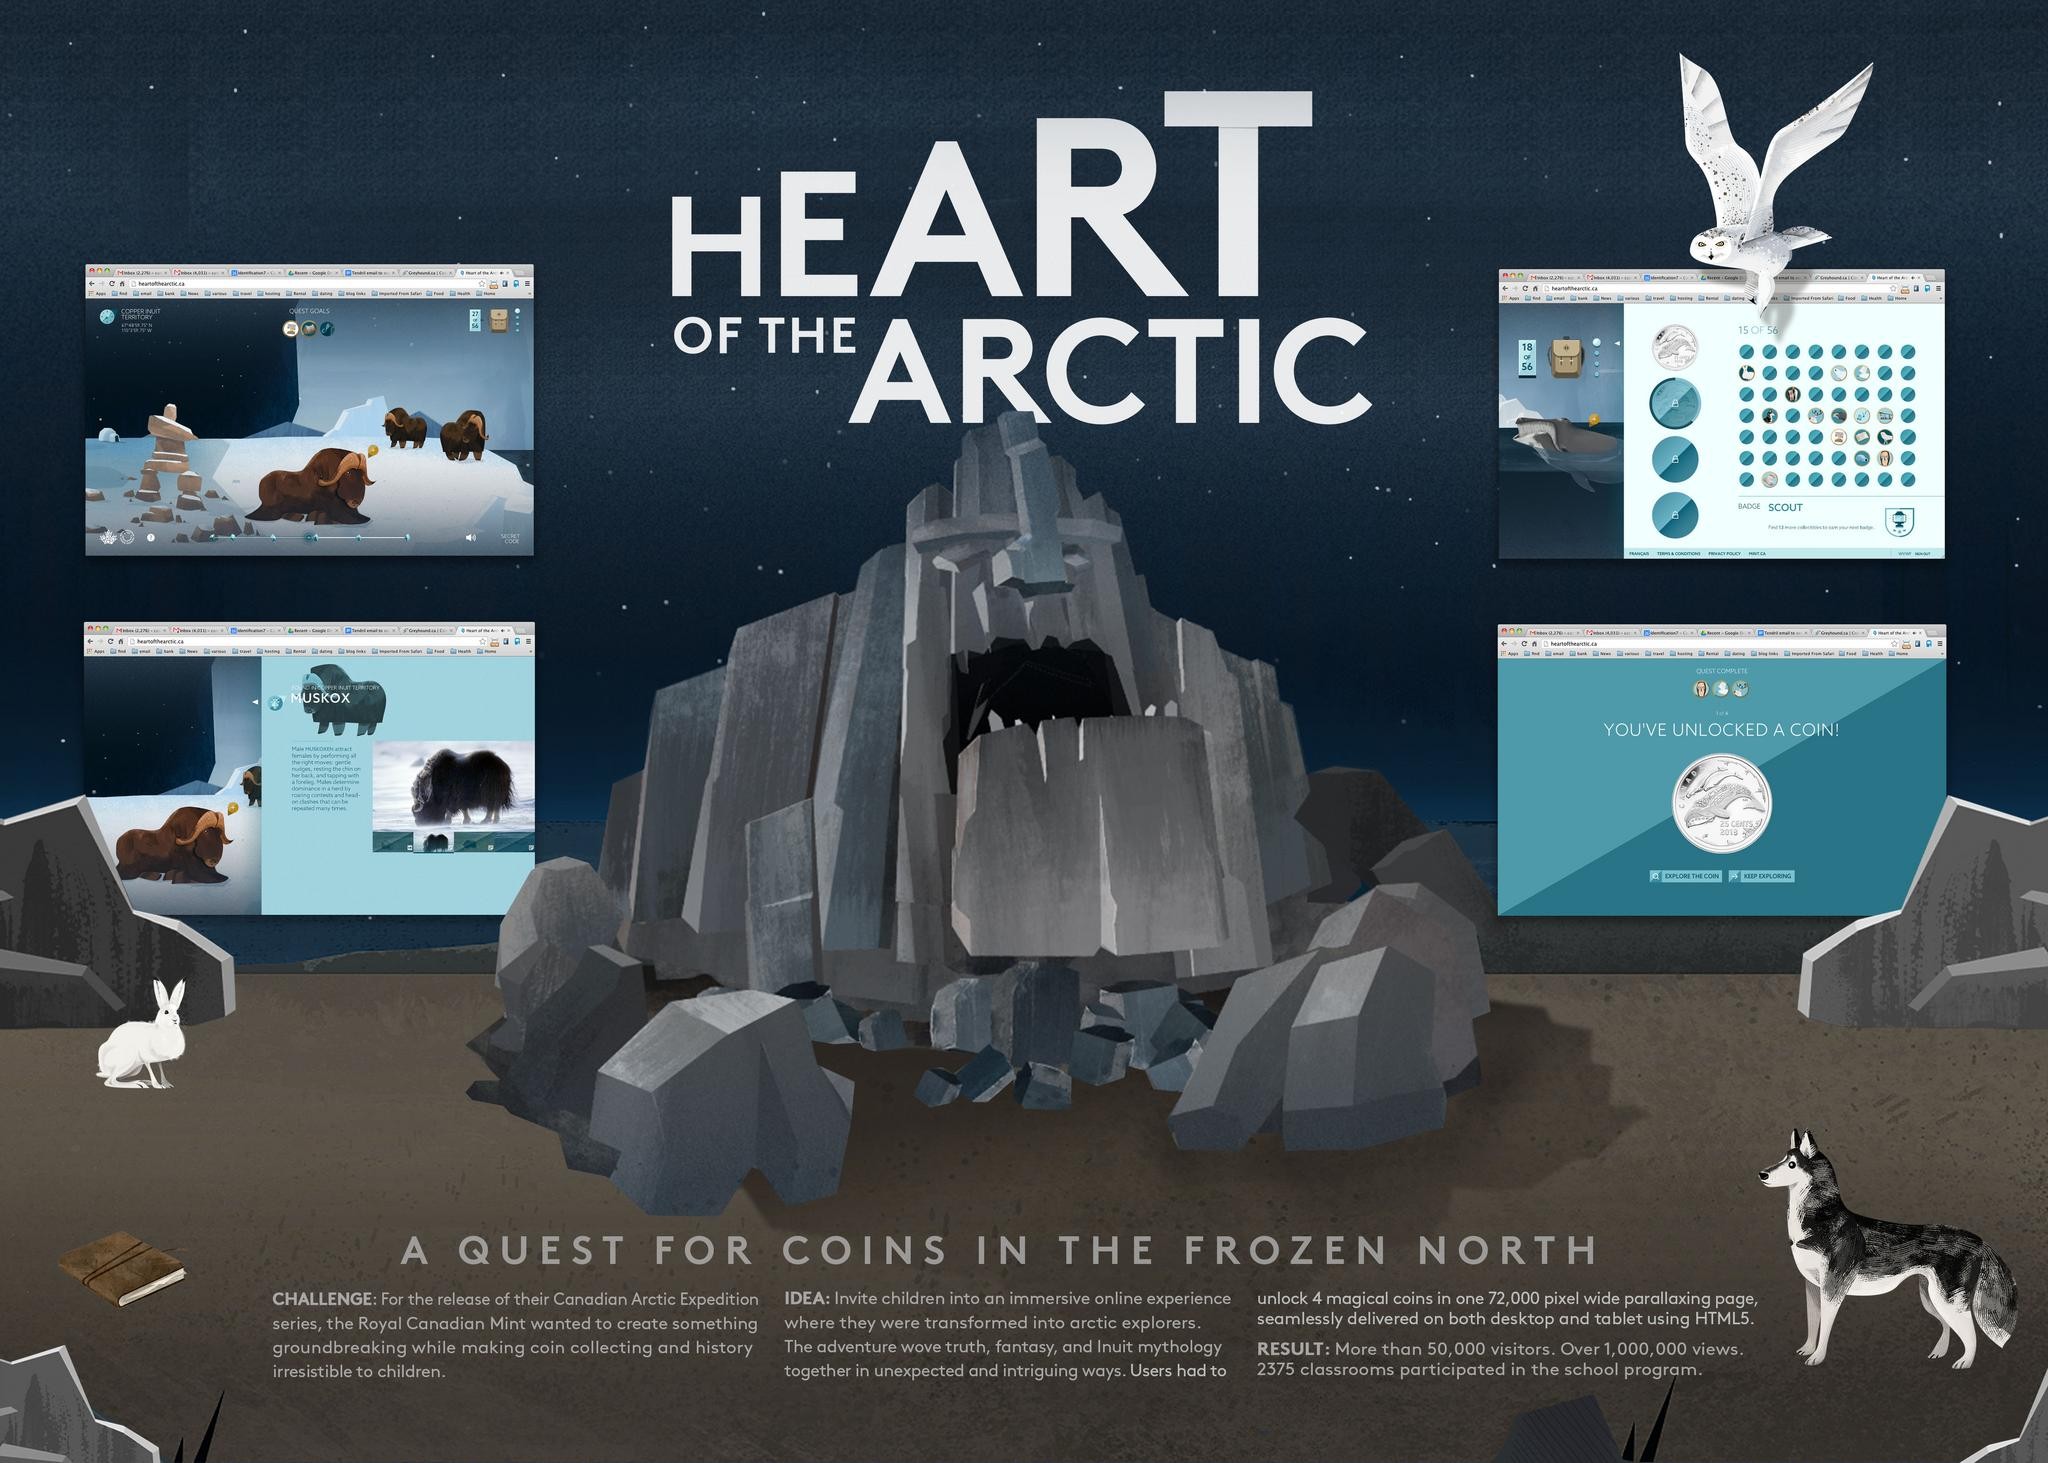 HEART OF THE ARCTIC